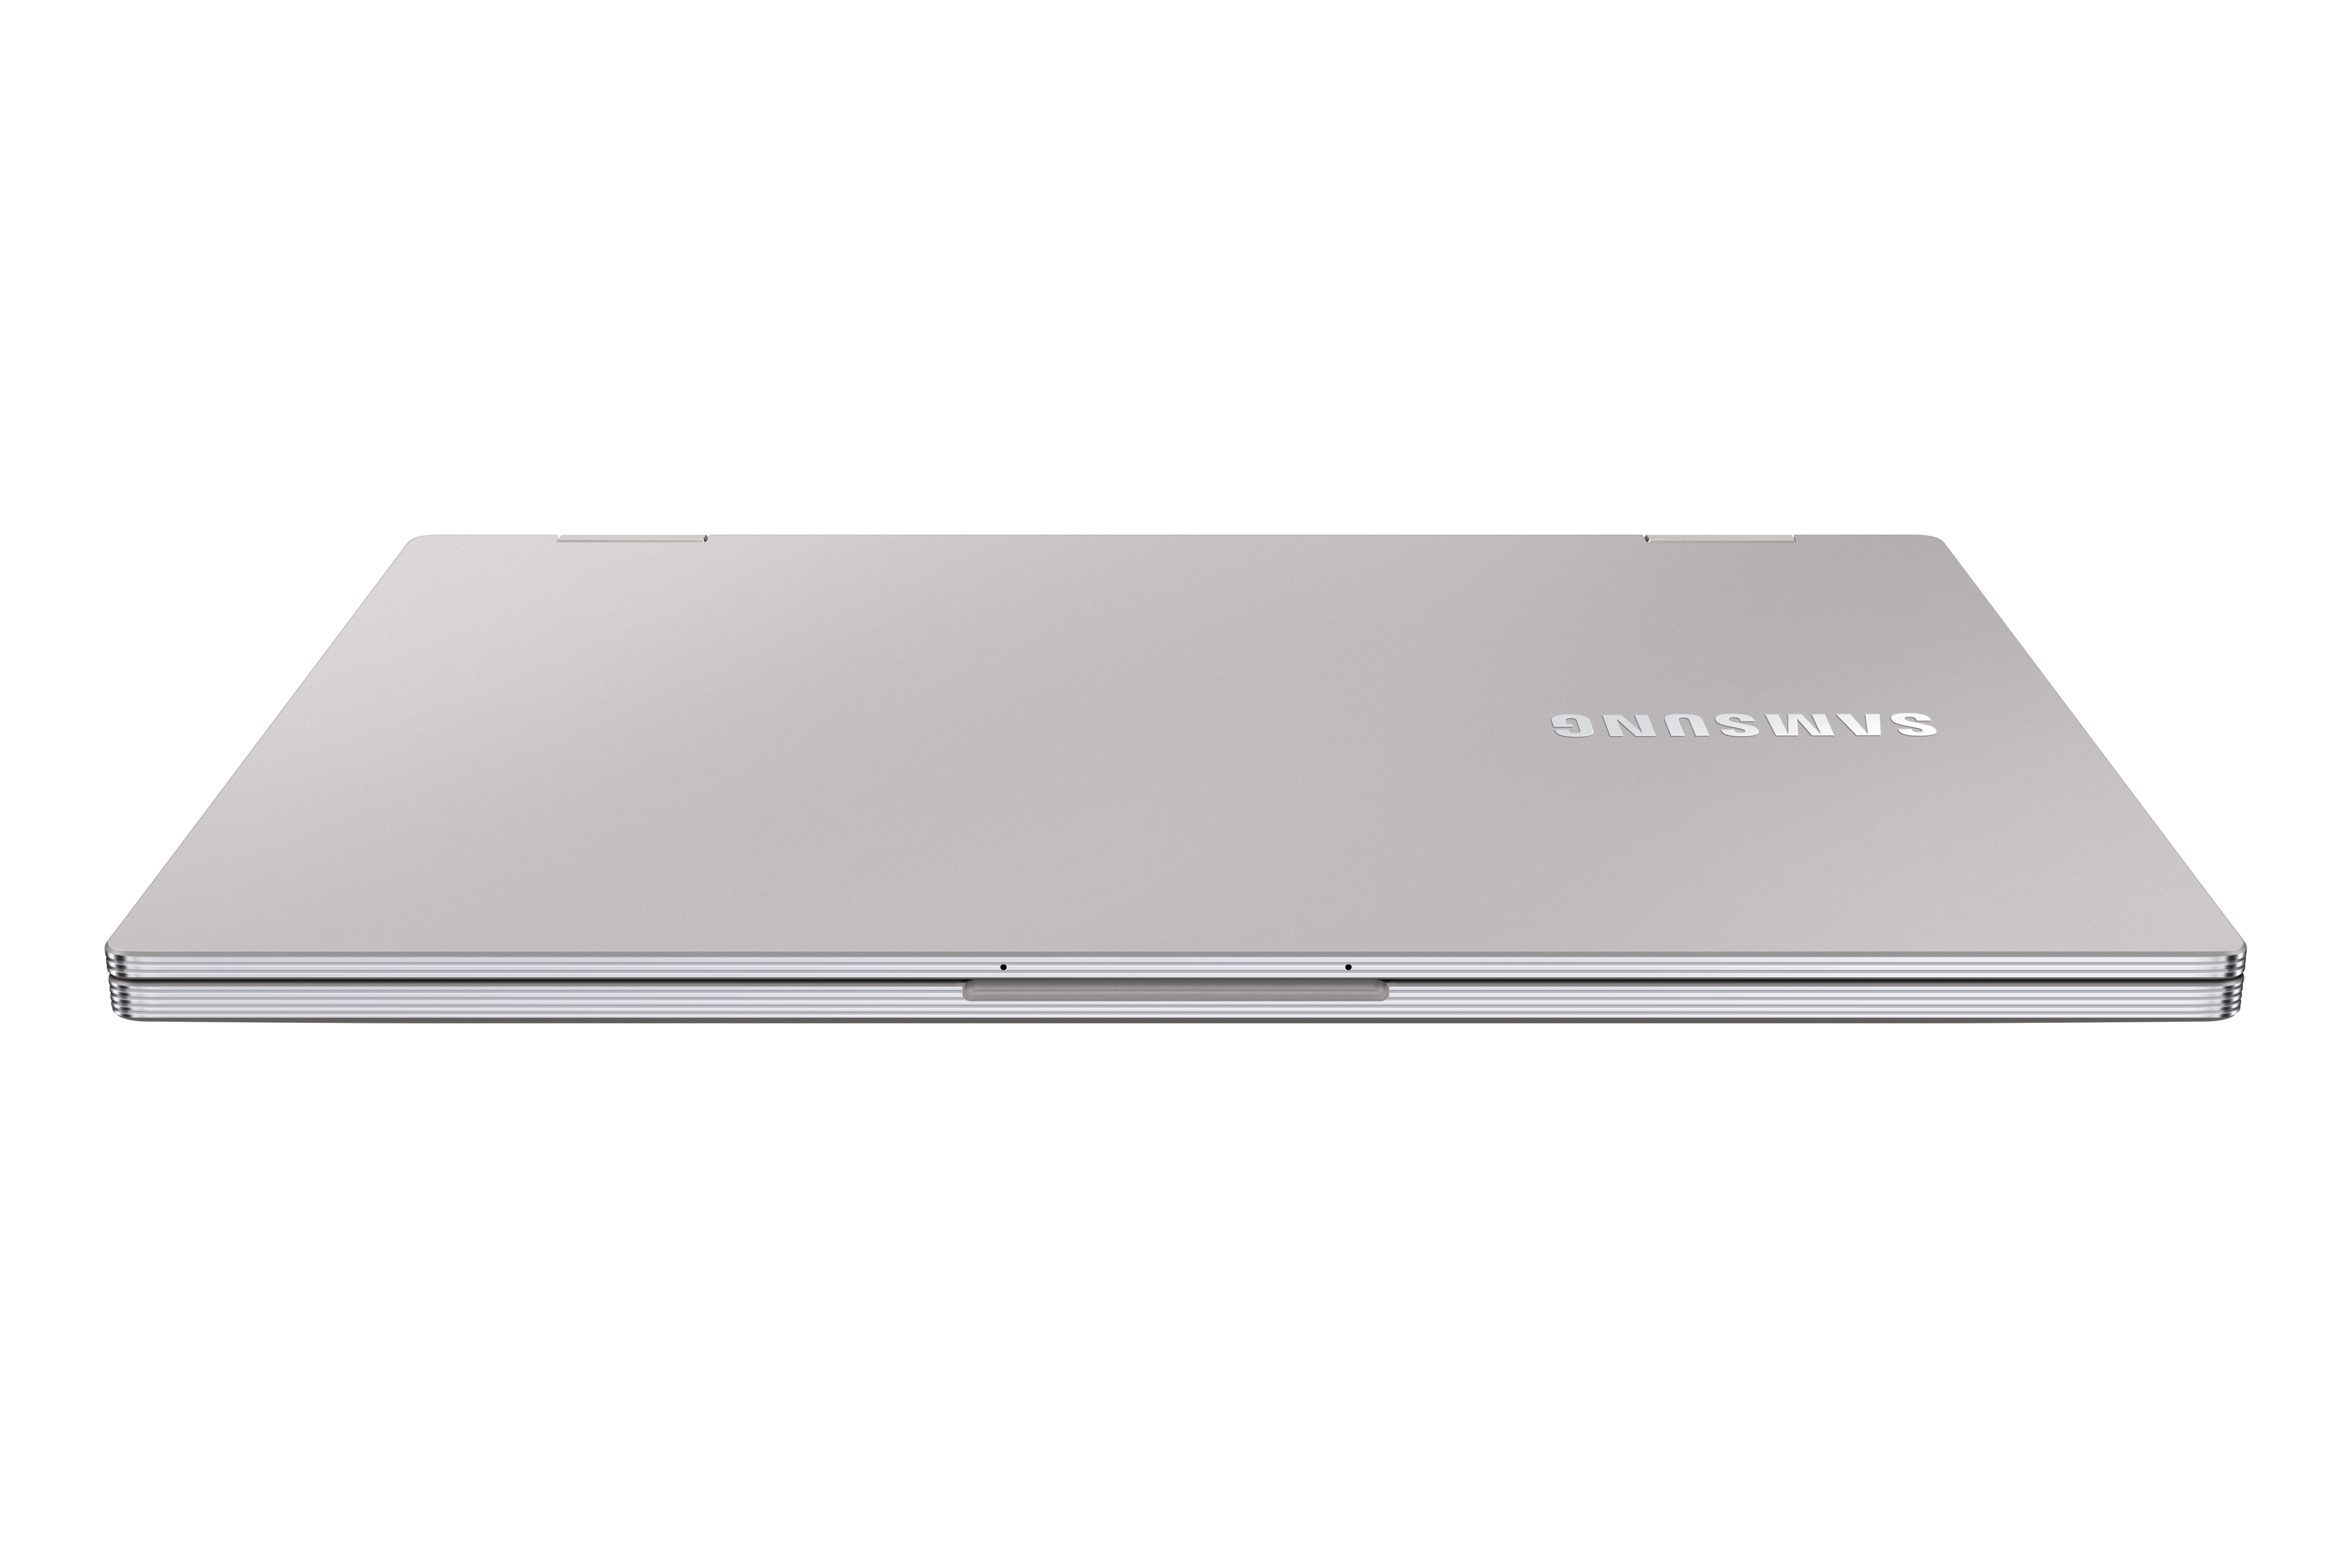 Thumbnail image of Notebook 9 Pro (512 GB)